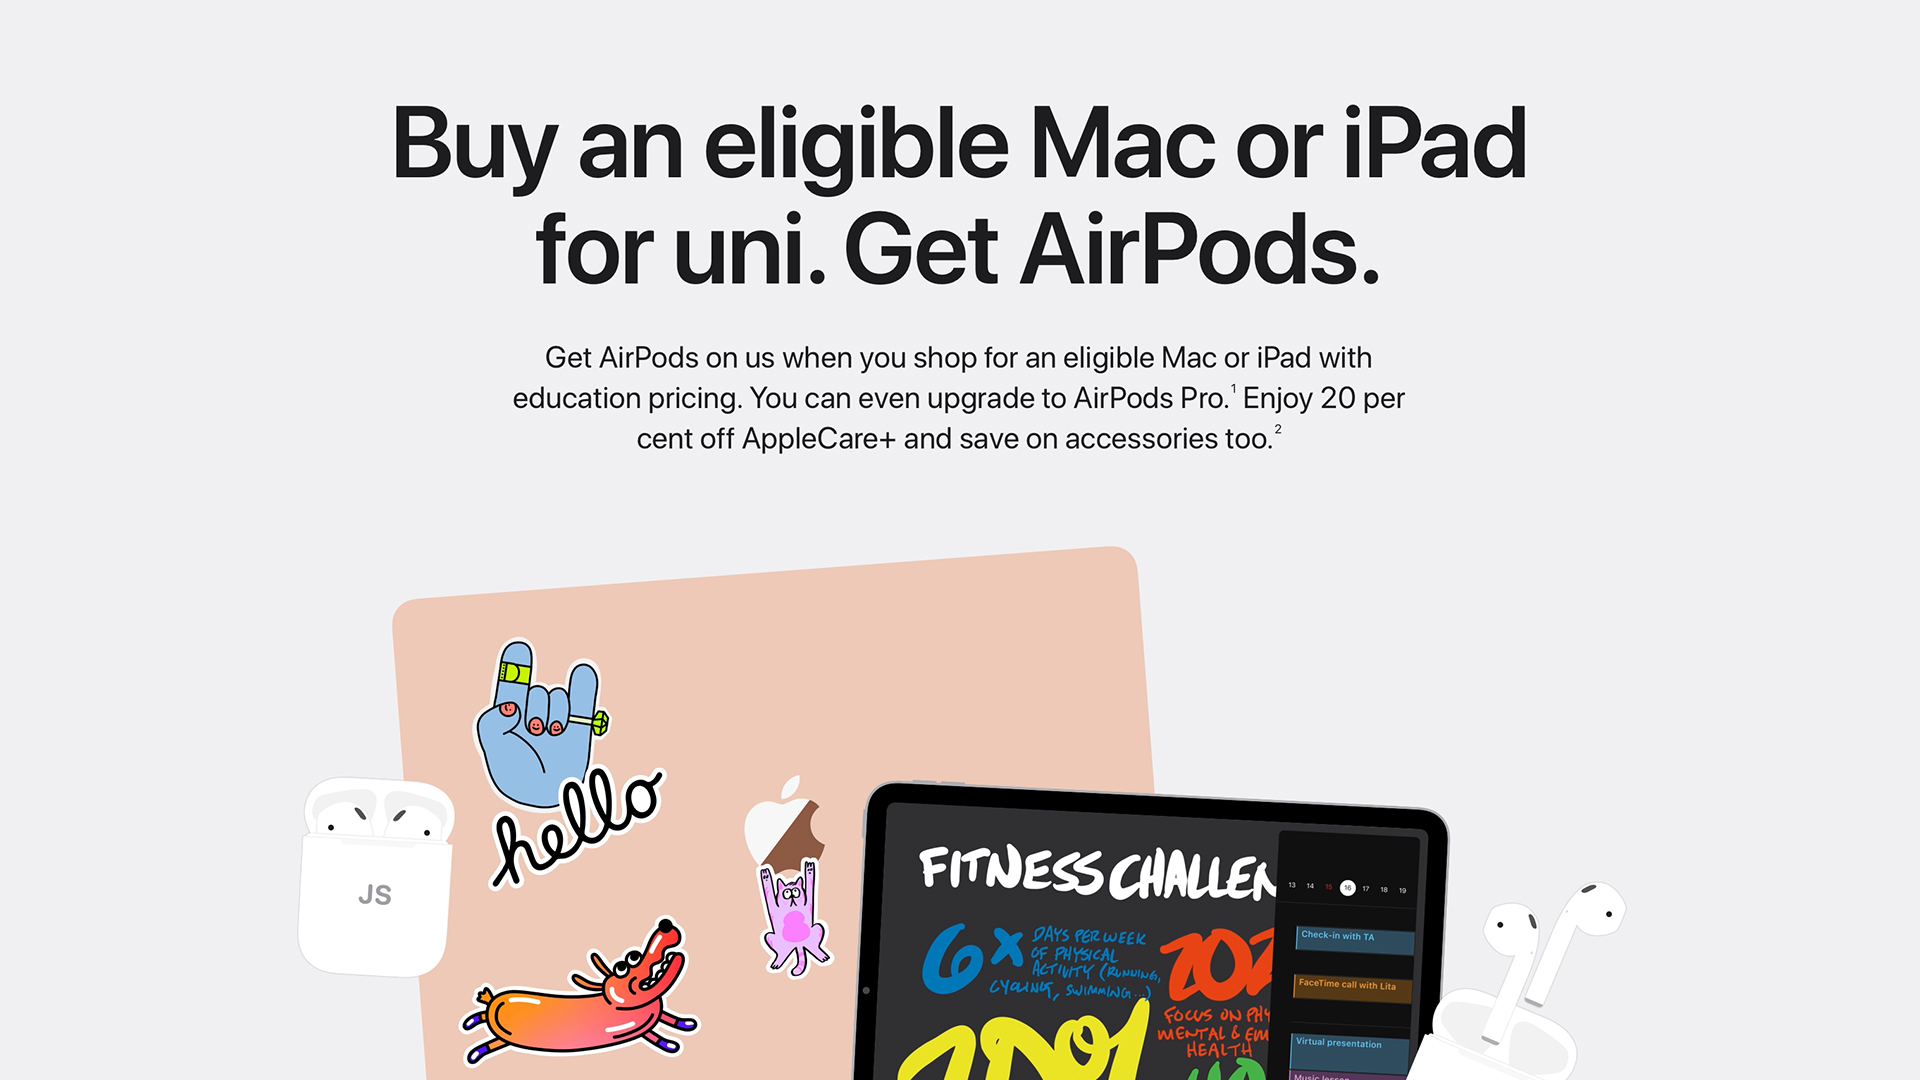 University' promo with free AirPods 